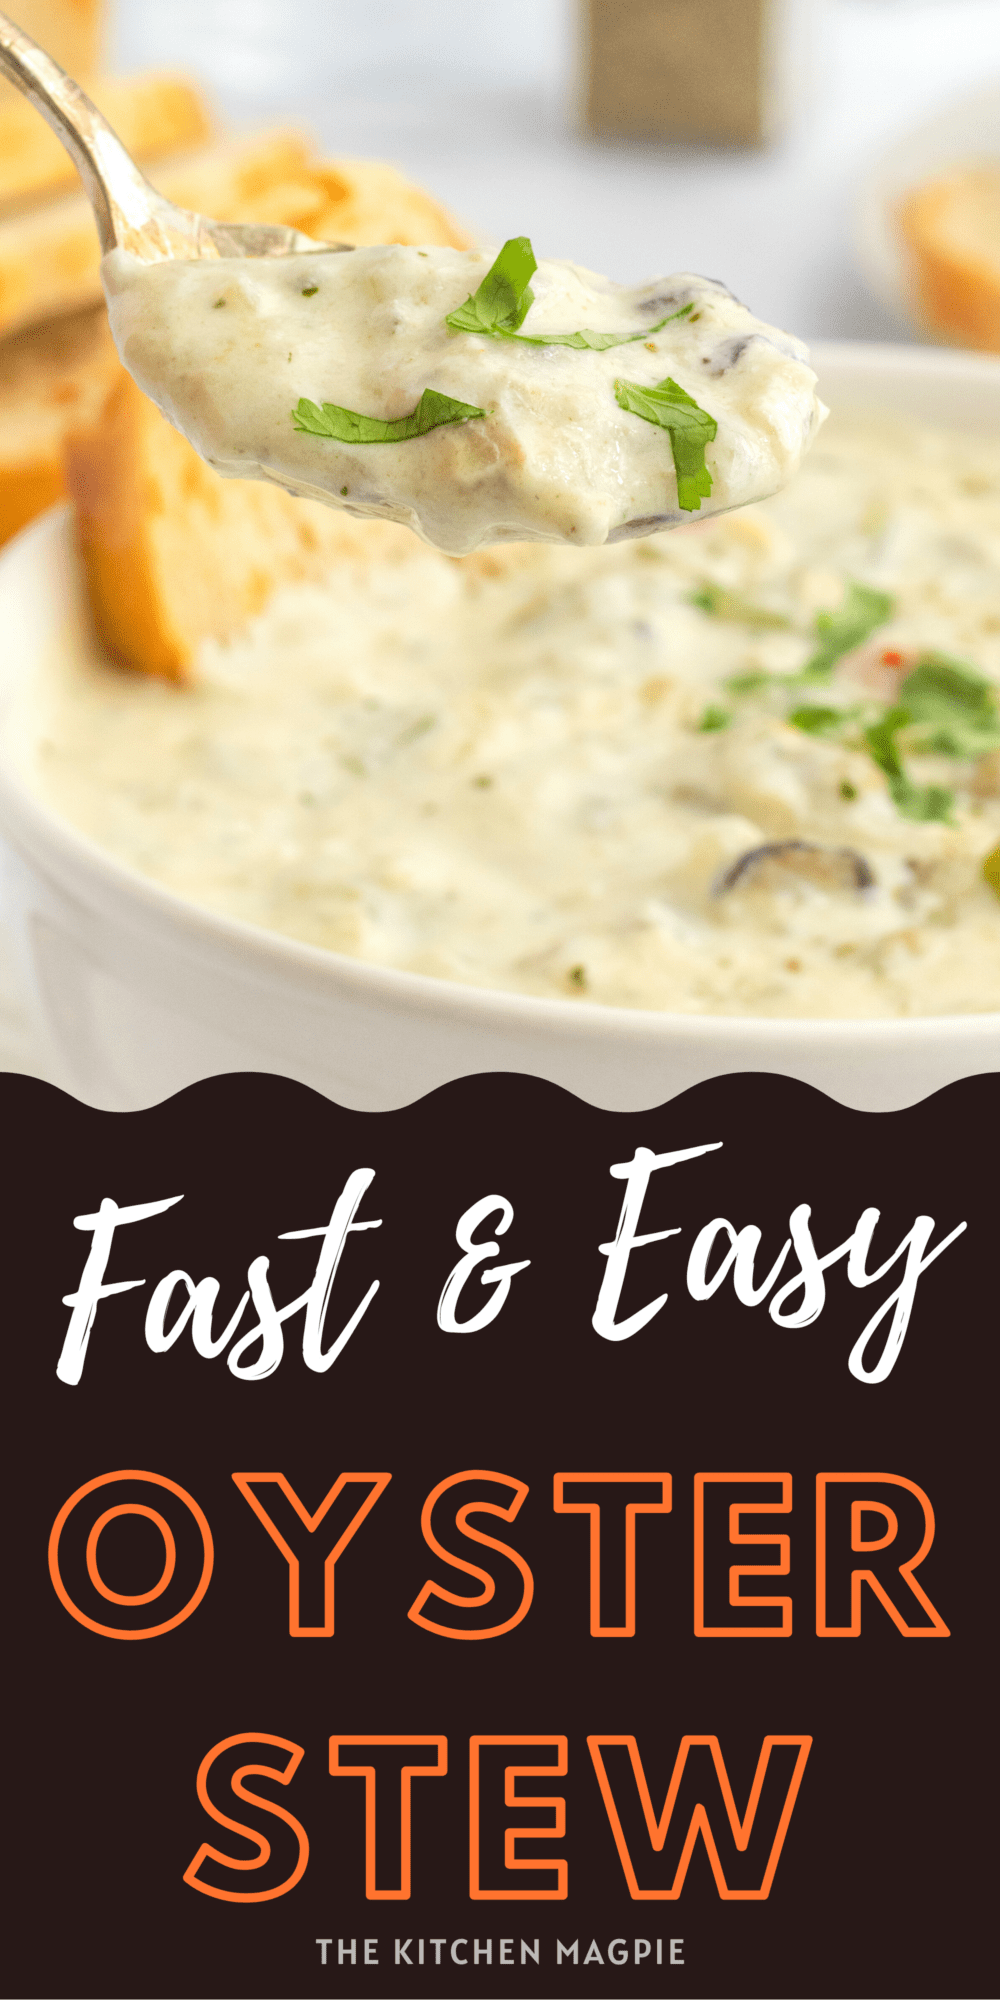 A light stew filled with tender oysters, vegetables and a thick cream. Add some toasted baguette to make this a great family dinner.